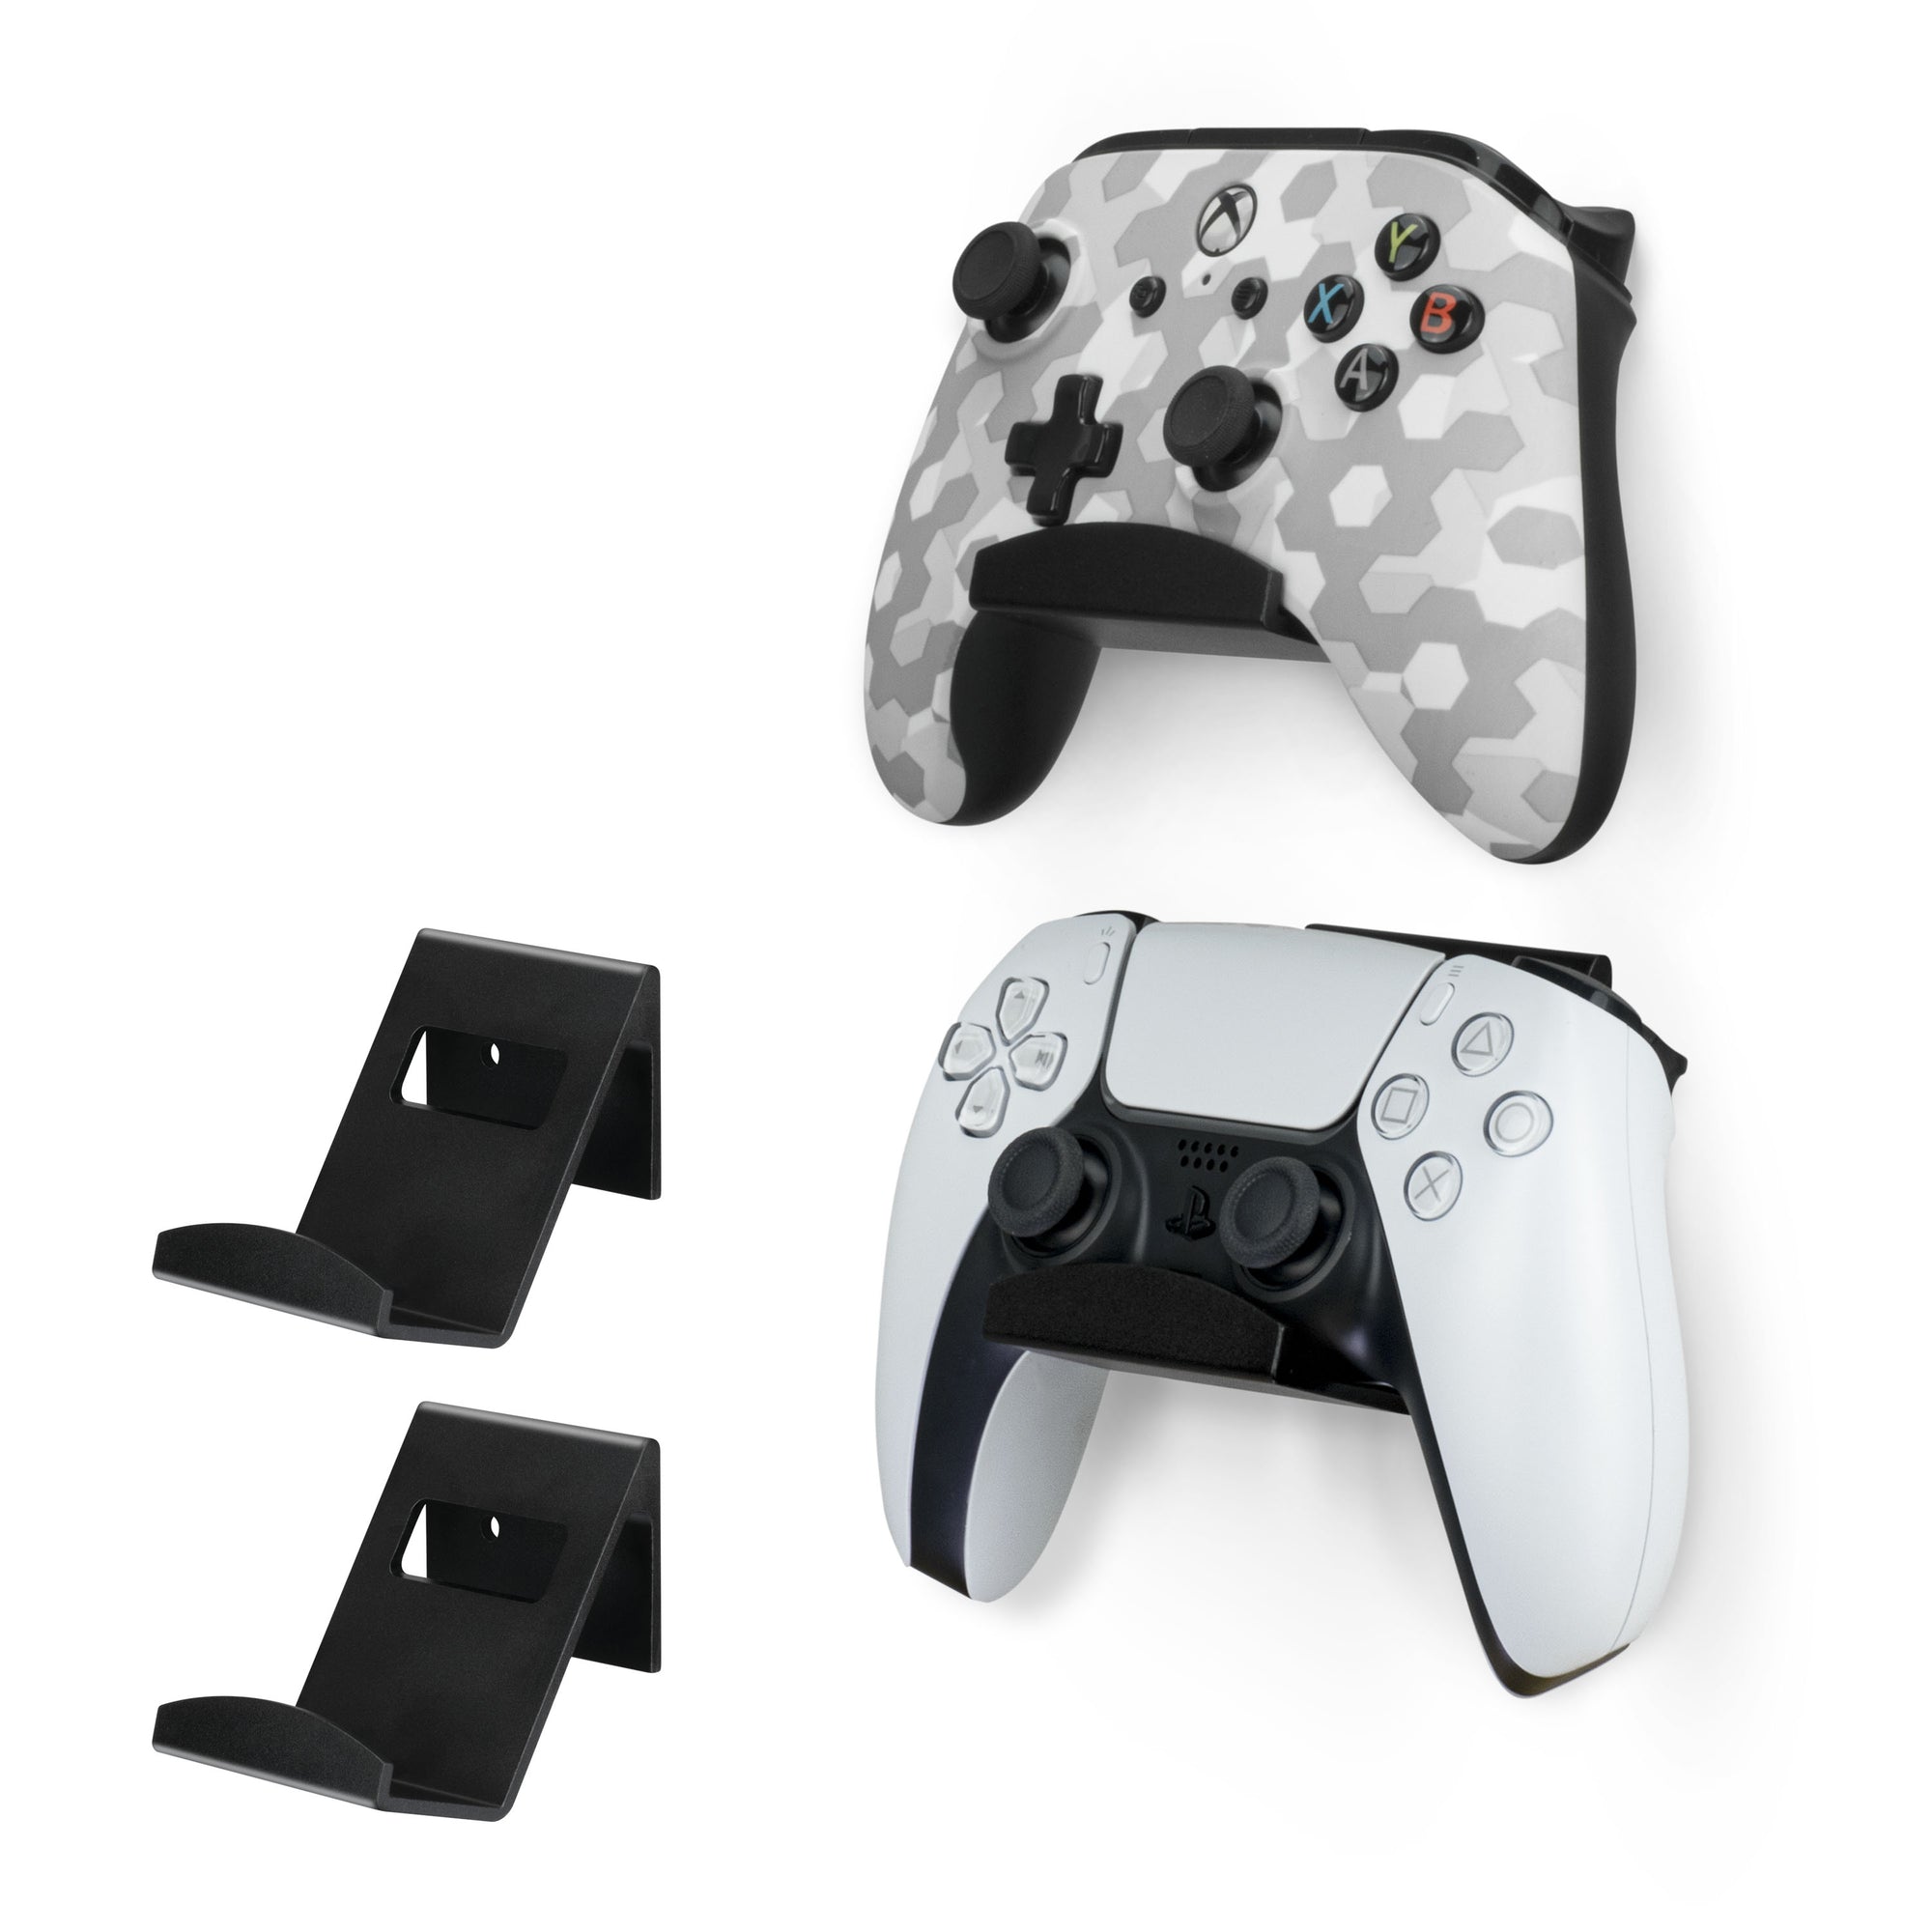 Metal Controller Holder Stand Wall Mount for Xbox, PS5, PS4, PC & More Gaming Accessories, Adhesive & Screw Universal Fit